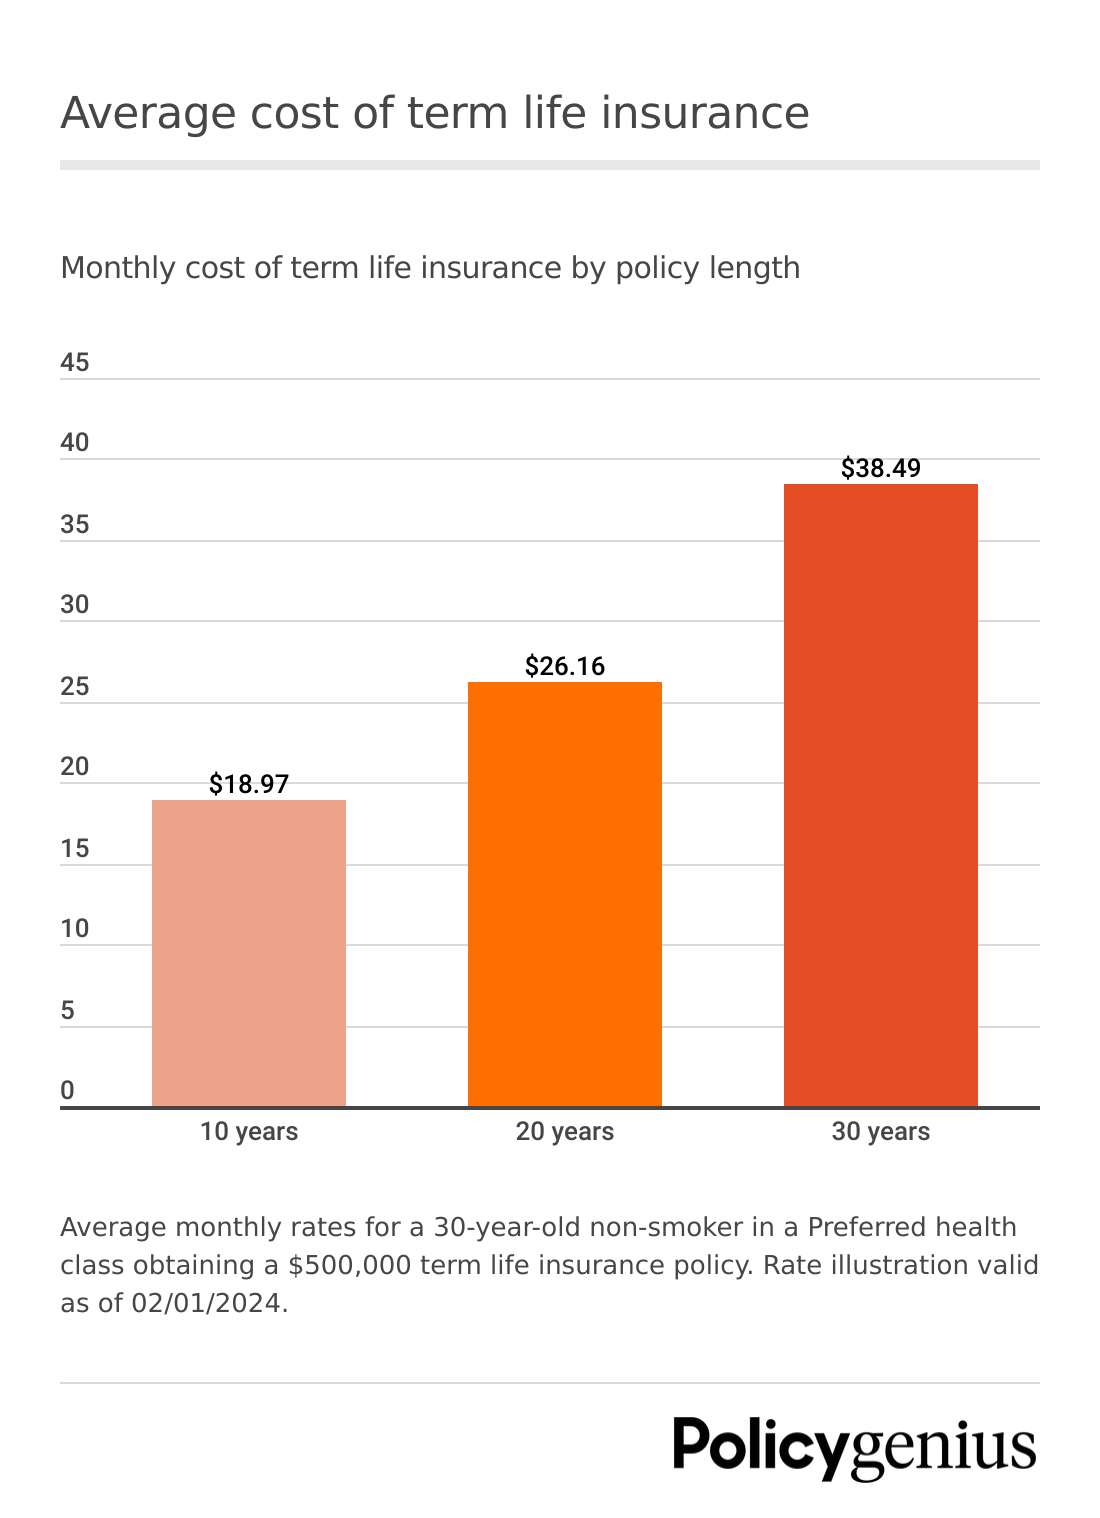 Average cost of term life insurance based on policies offered through Policygenius as of February of 2024.